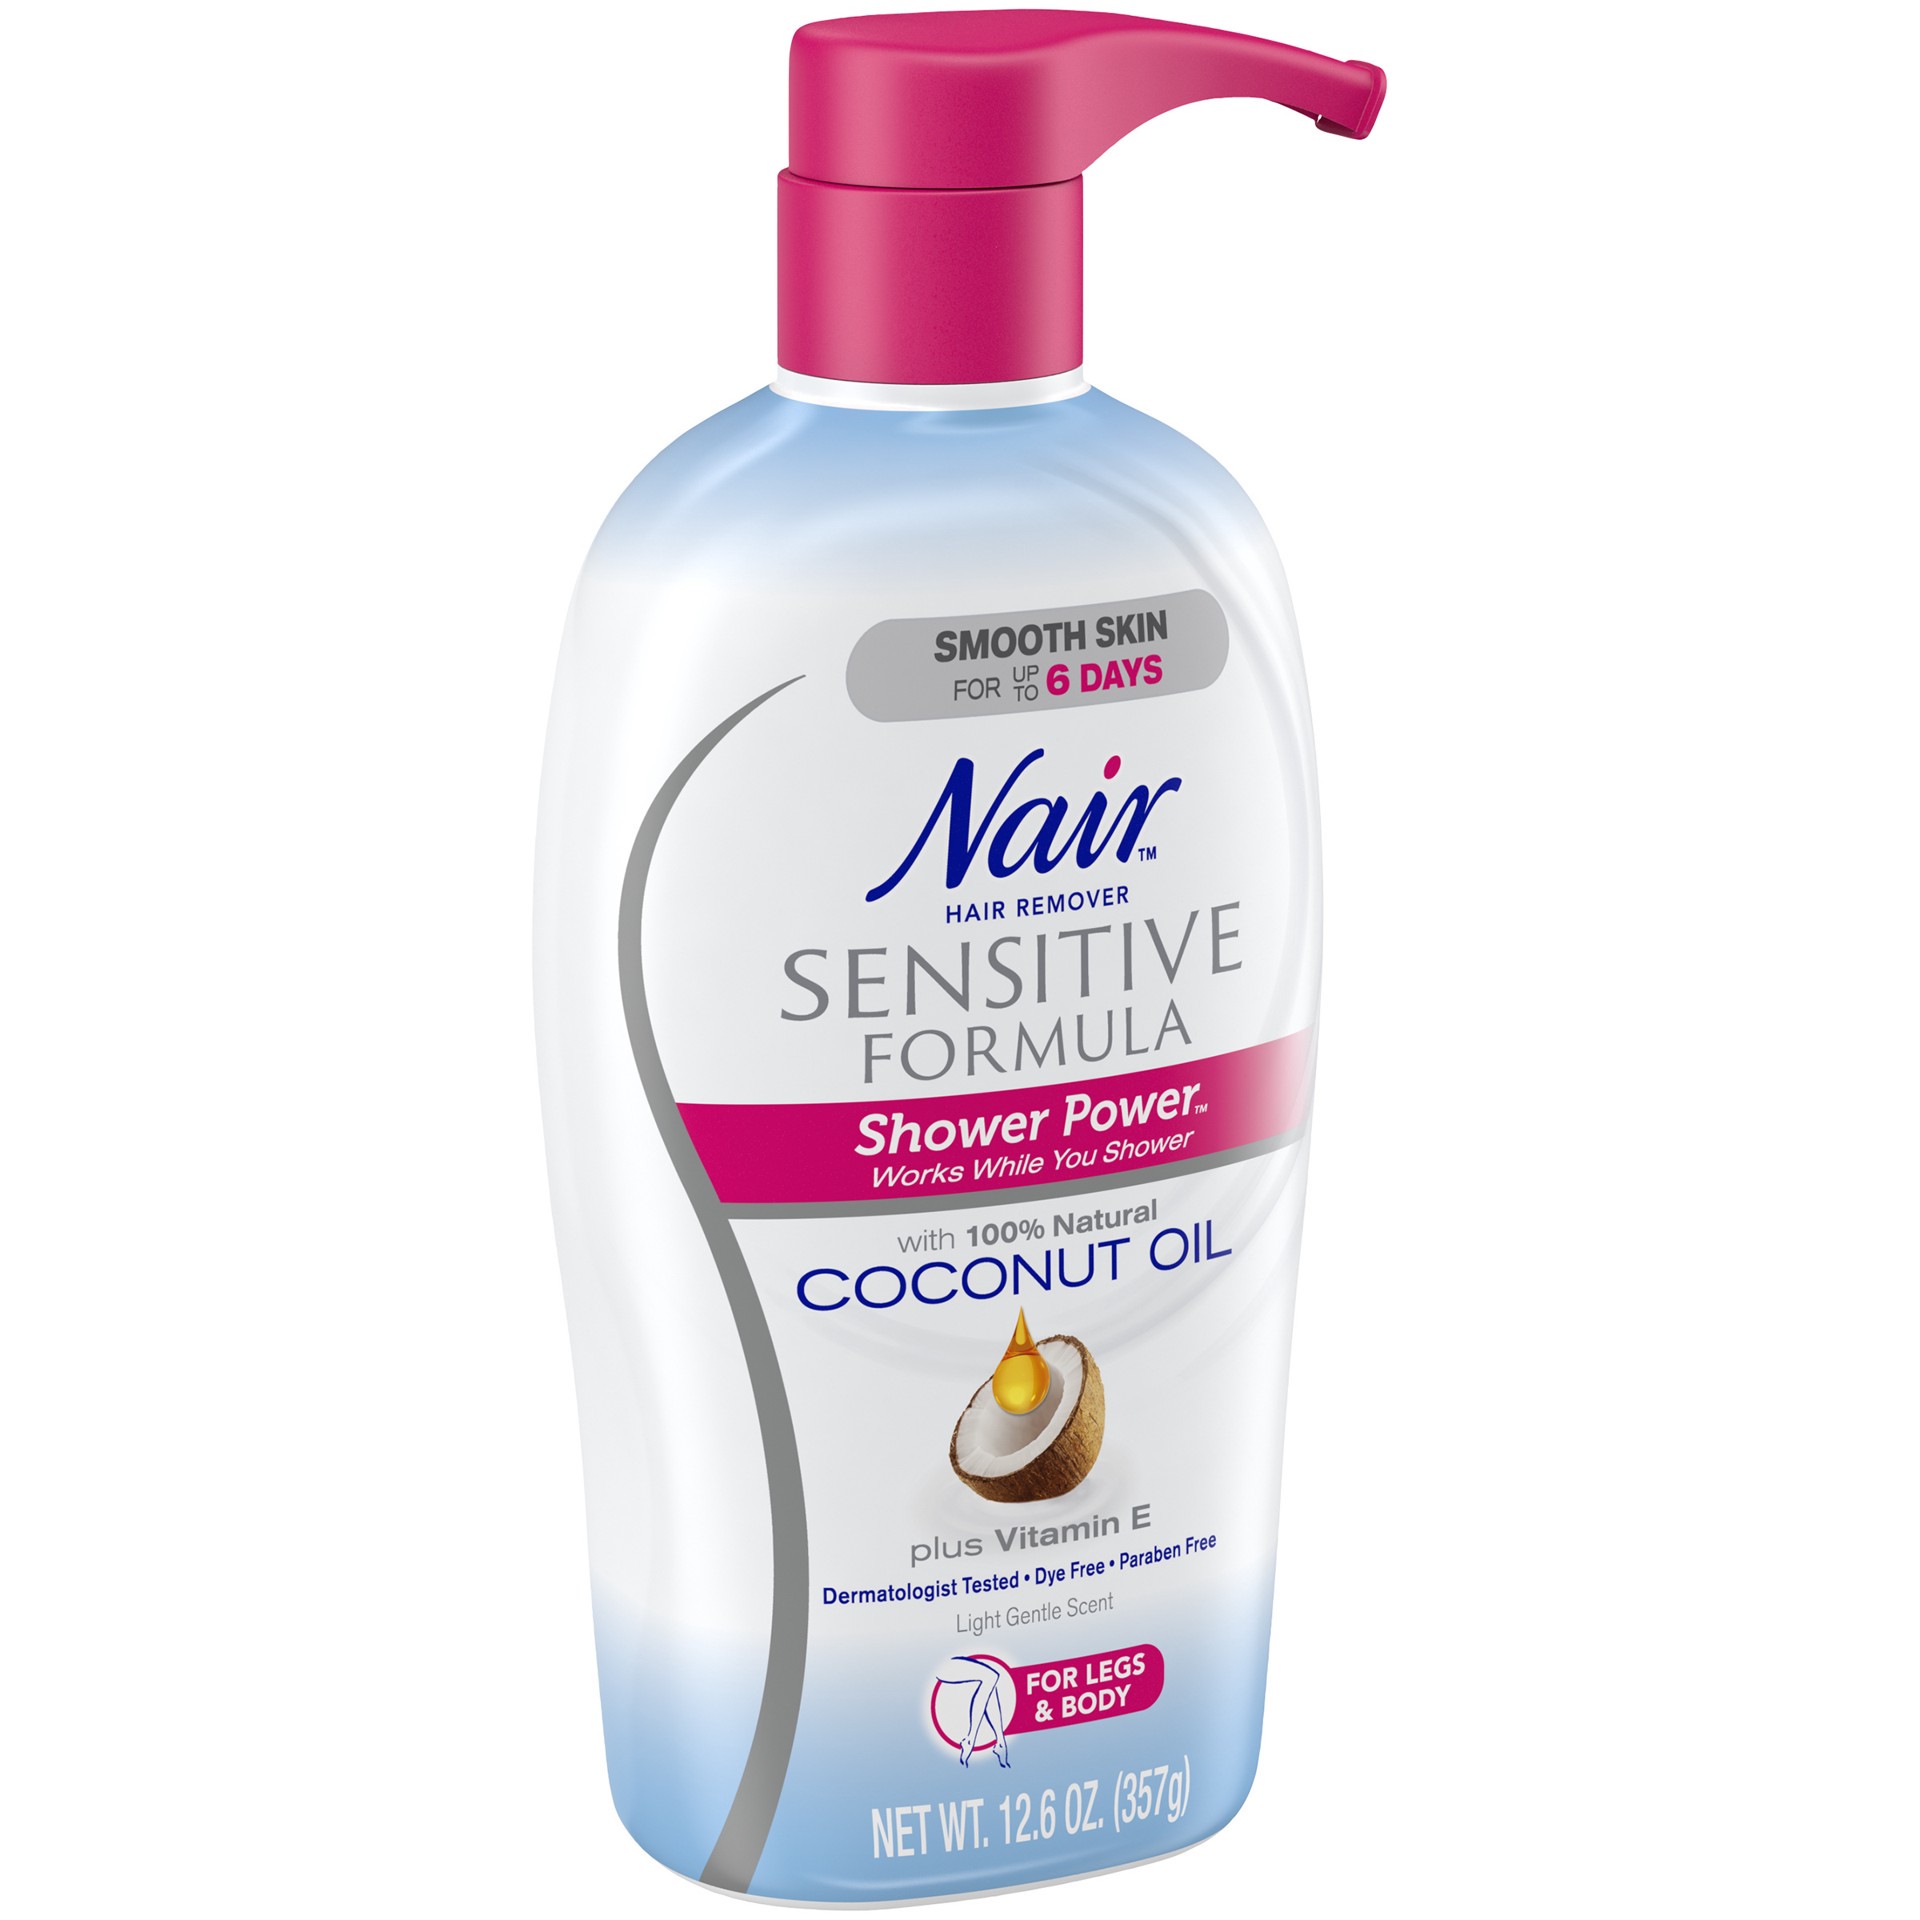 slide 4 of 4, Nair Hair Remover Sensitive Formula Shower Power with Coconut Oil and Vitamin E, 12.6oz, 12.6 oz